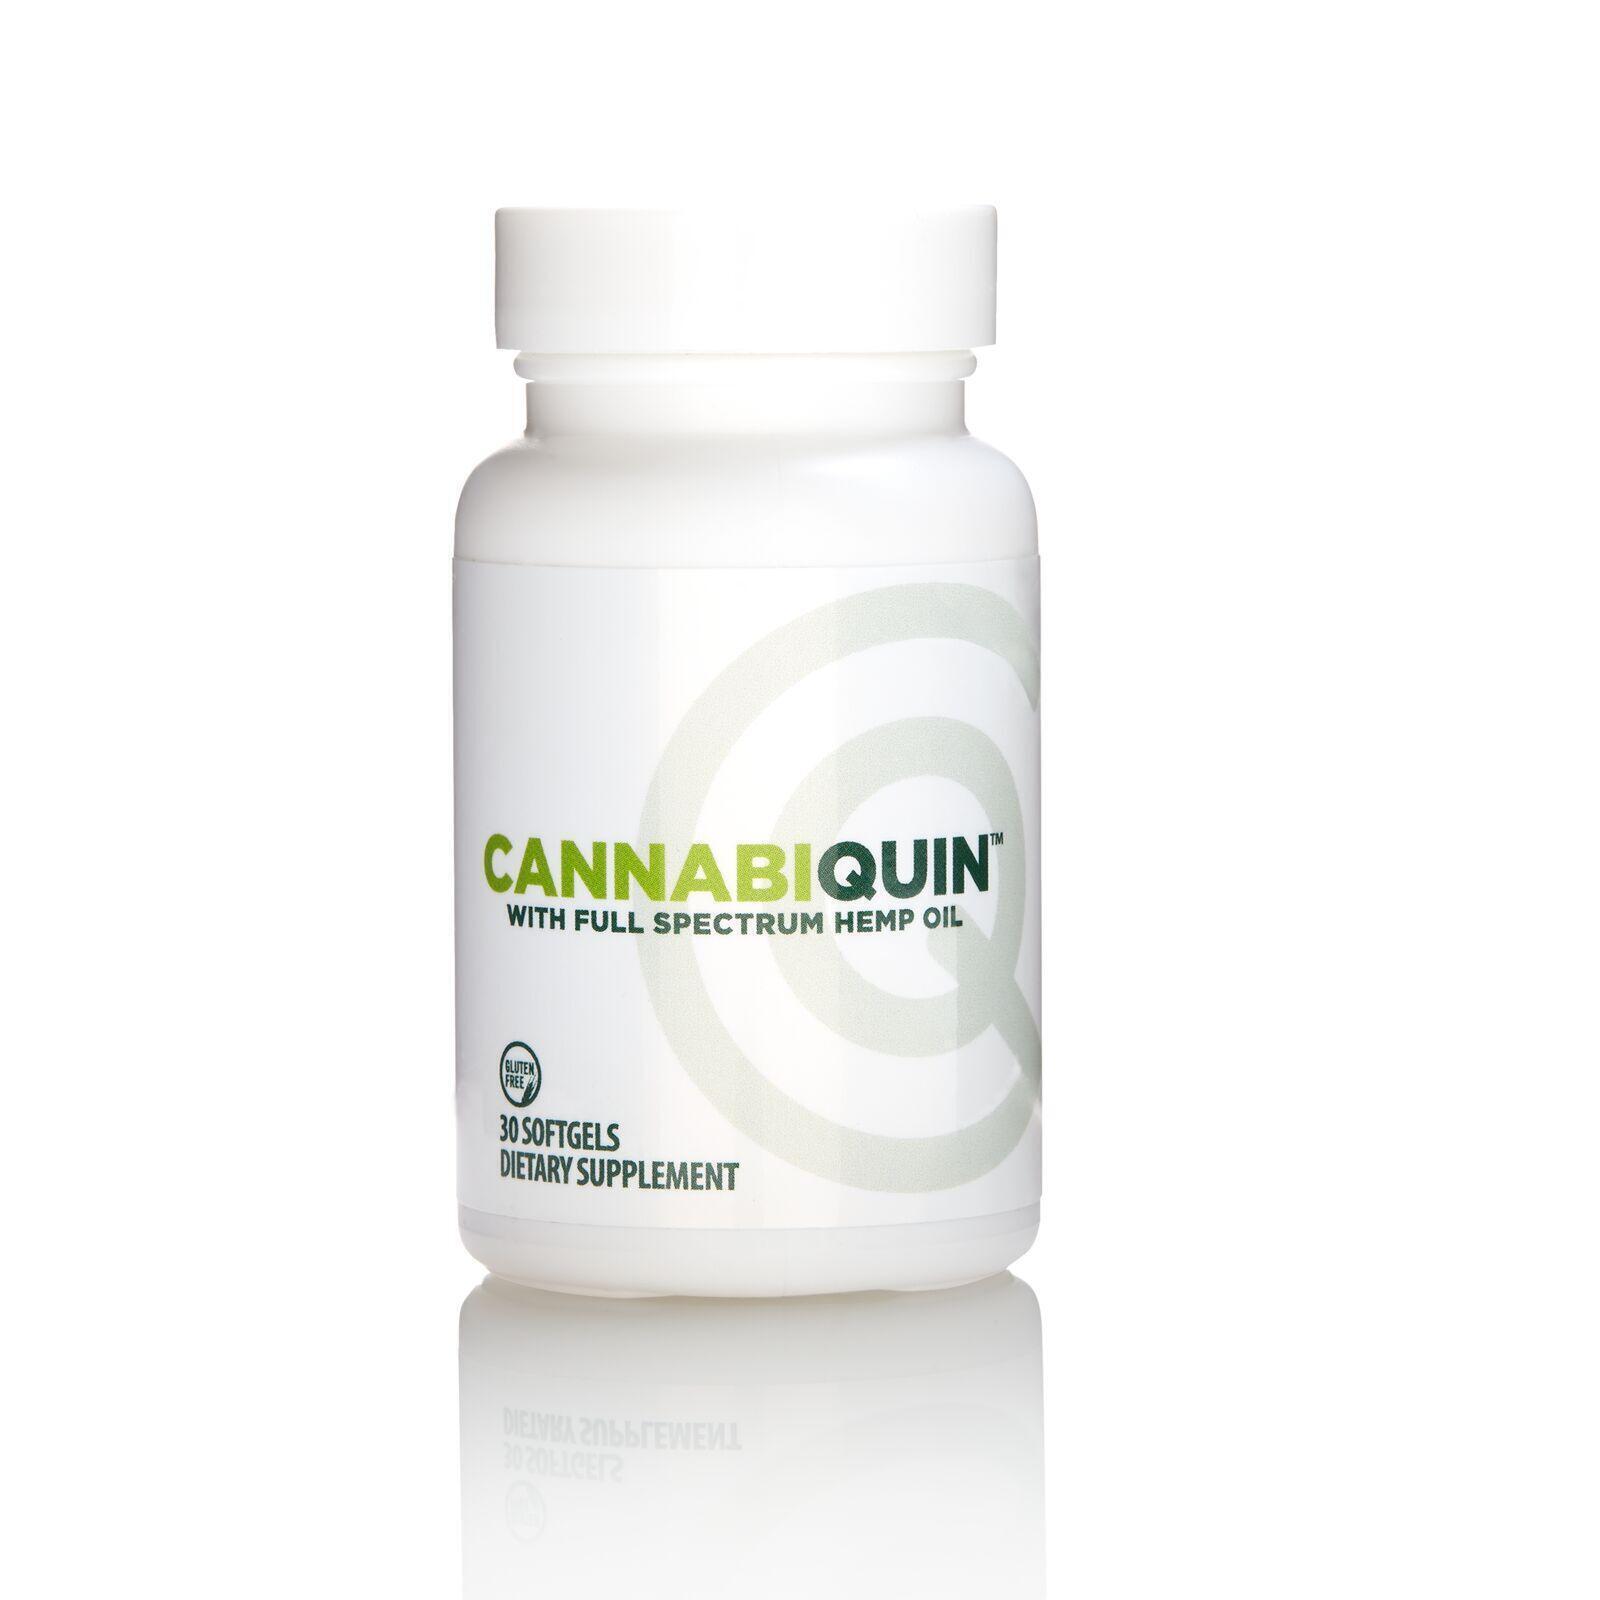 CannabiQuin,Product Tested No Detectable GMO